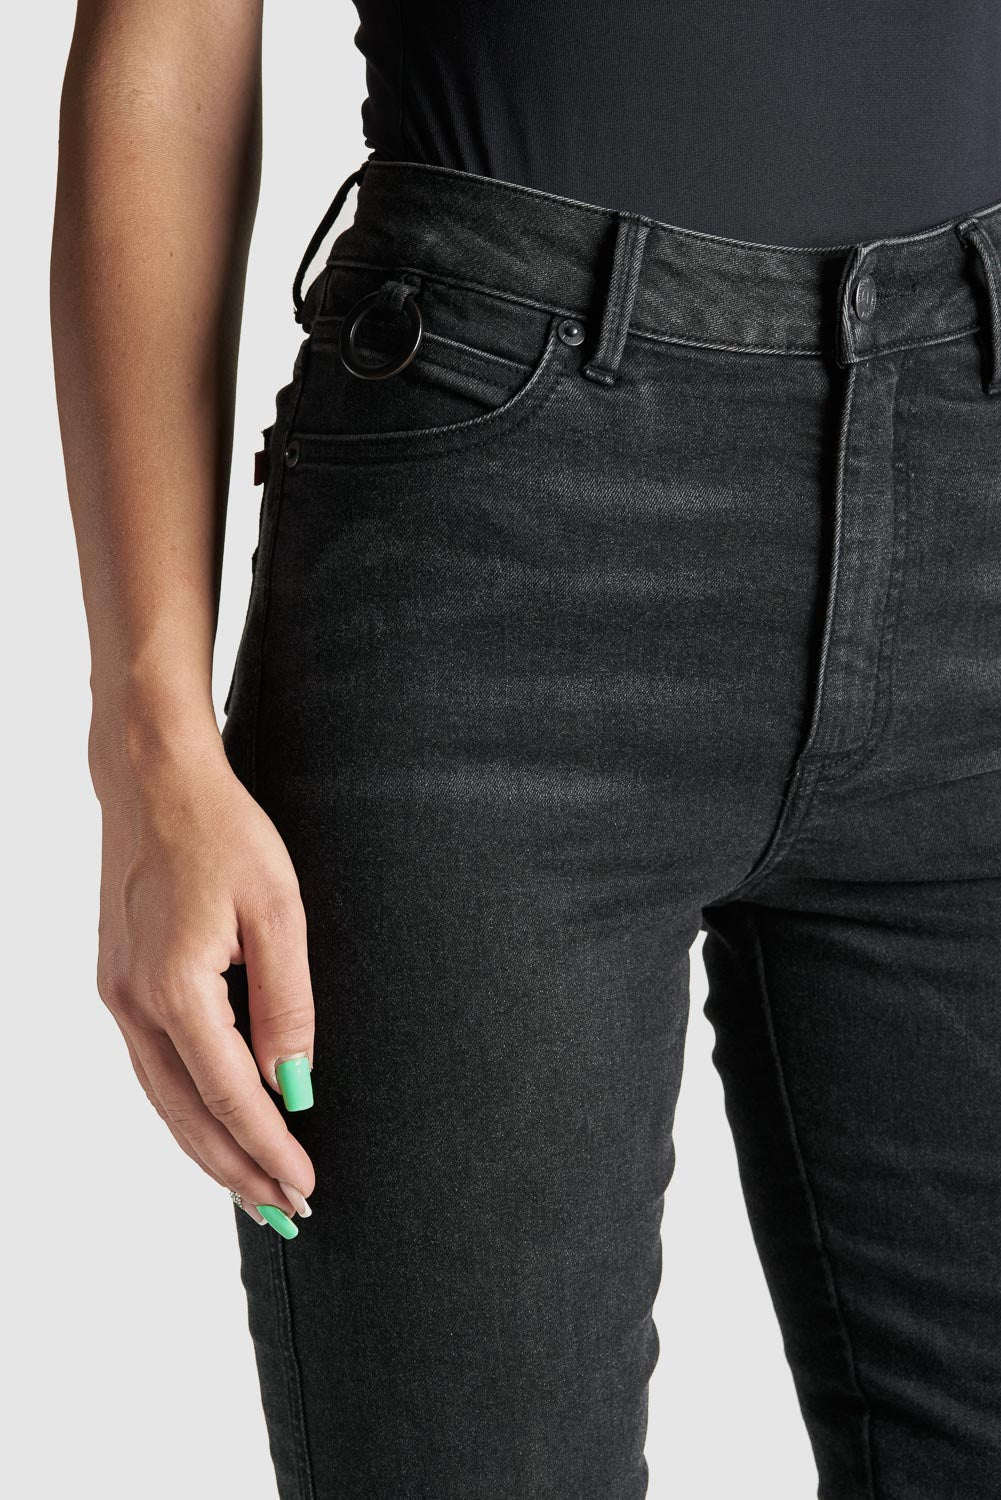 A close up of woman&#39;s waist wearing black high waist motorcycle jeans